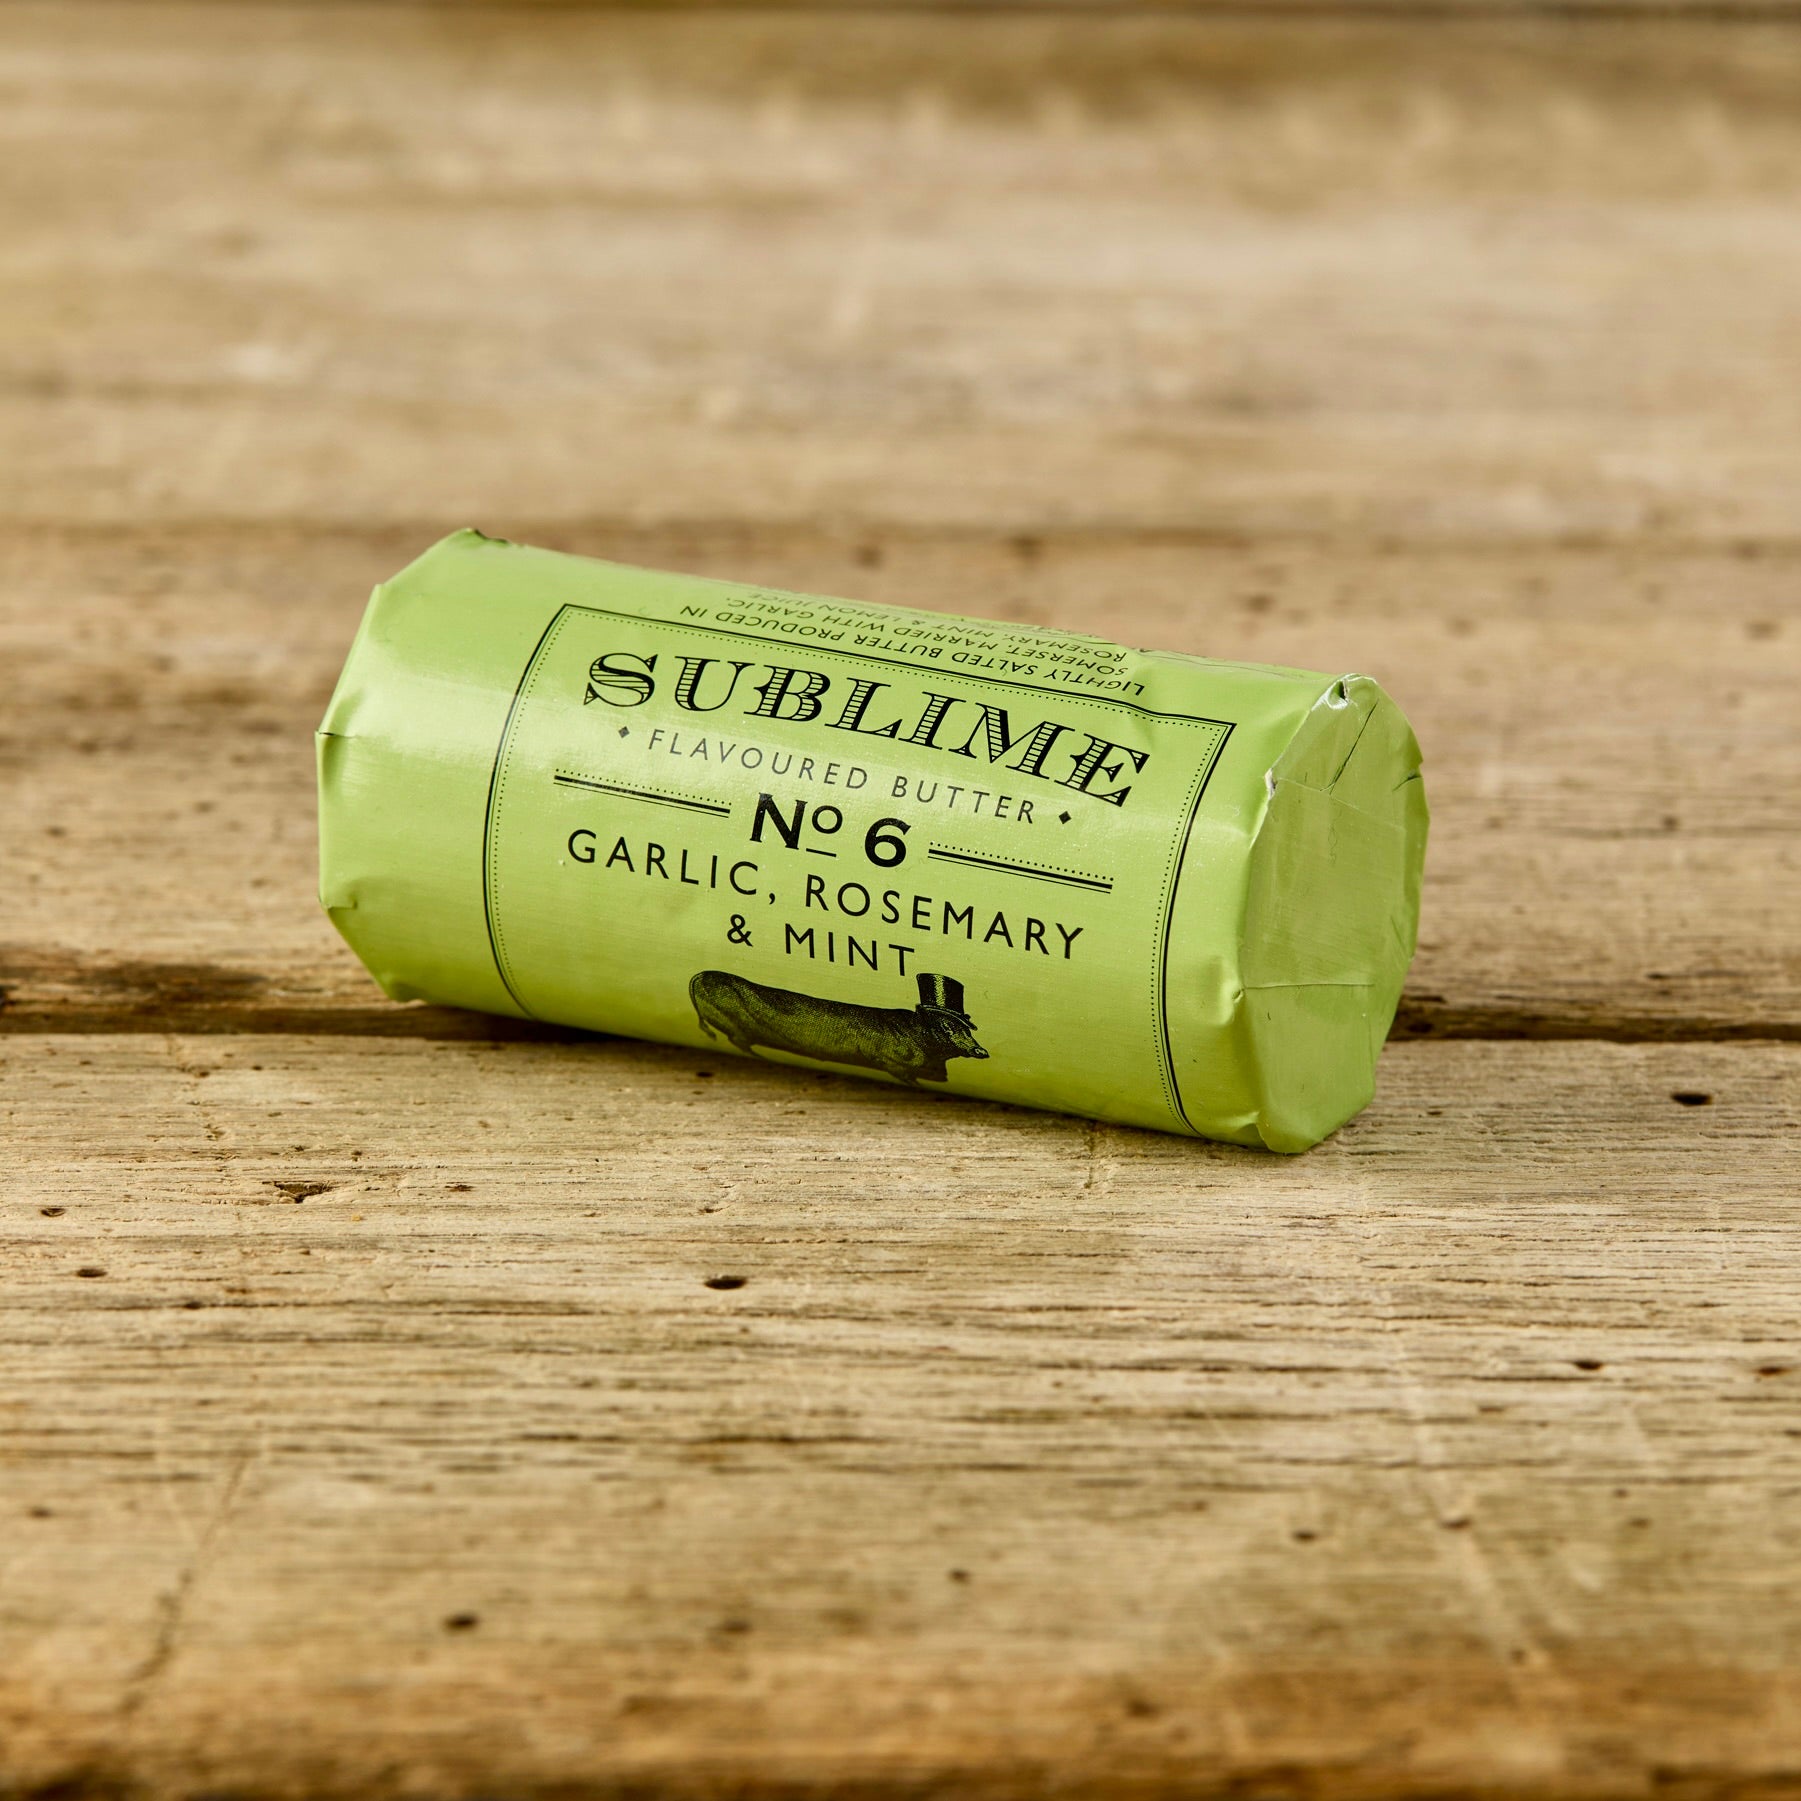 garlic, rosemary and mint flavoured butter by sublime butter